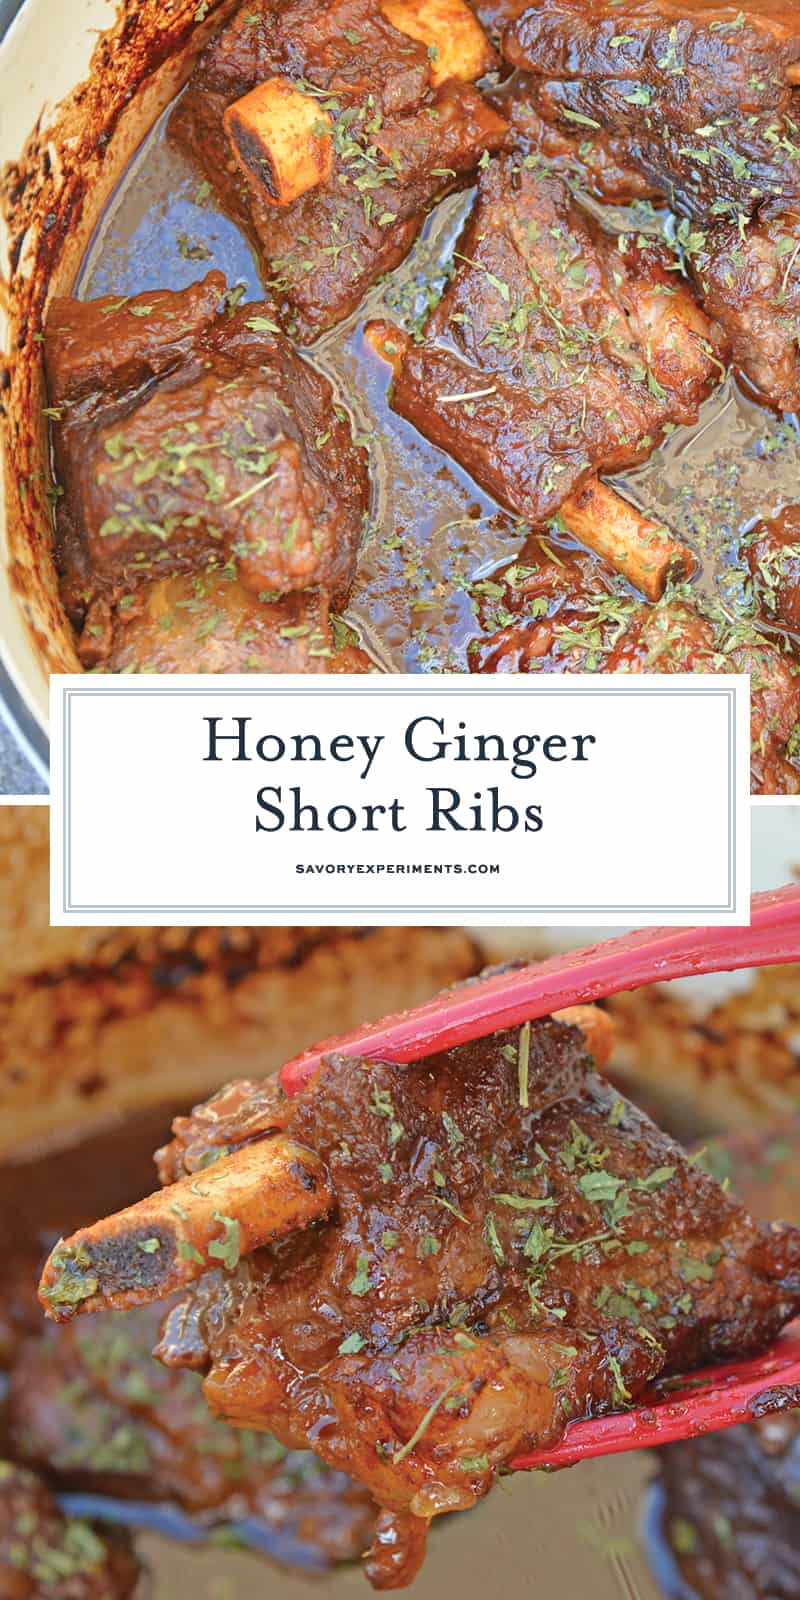 Honey Ginger Short Ribs are a zesty and sweet braised short rib recipe using traditional Asian spices. An easy recipe for fall-off-the-bone ribs. #braisedshortribs #shortribrecipe www.savoryexperiments.com